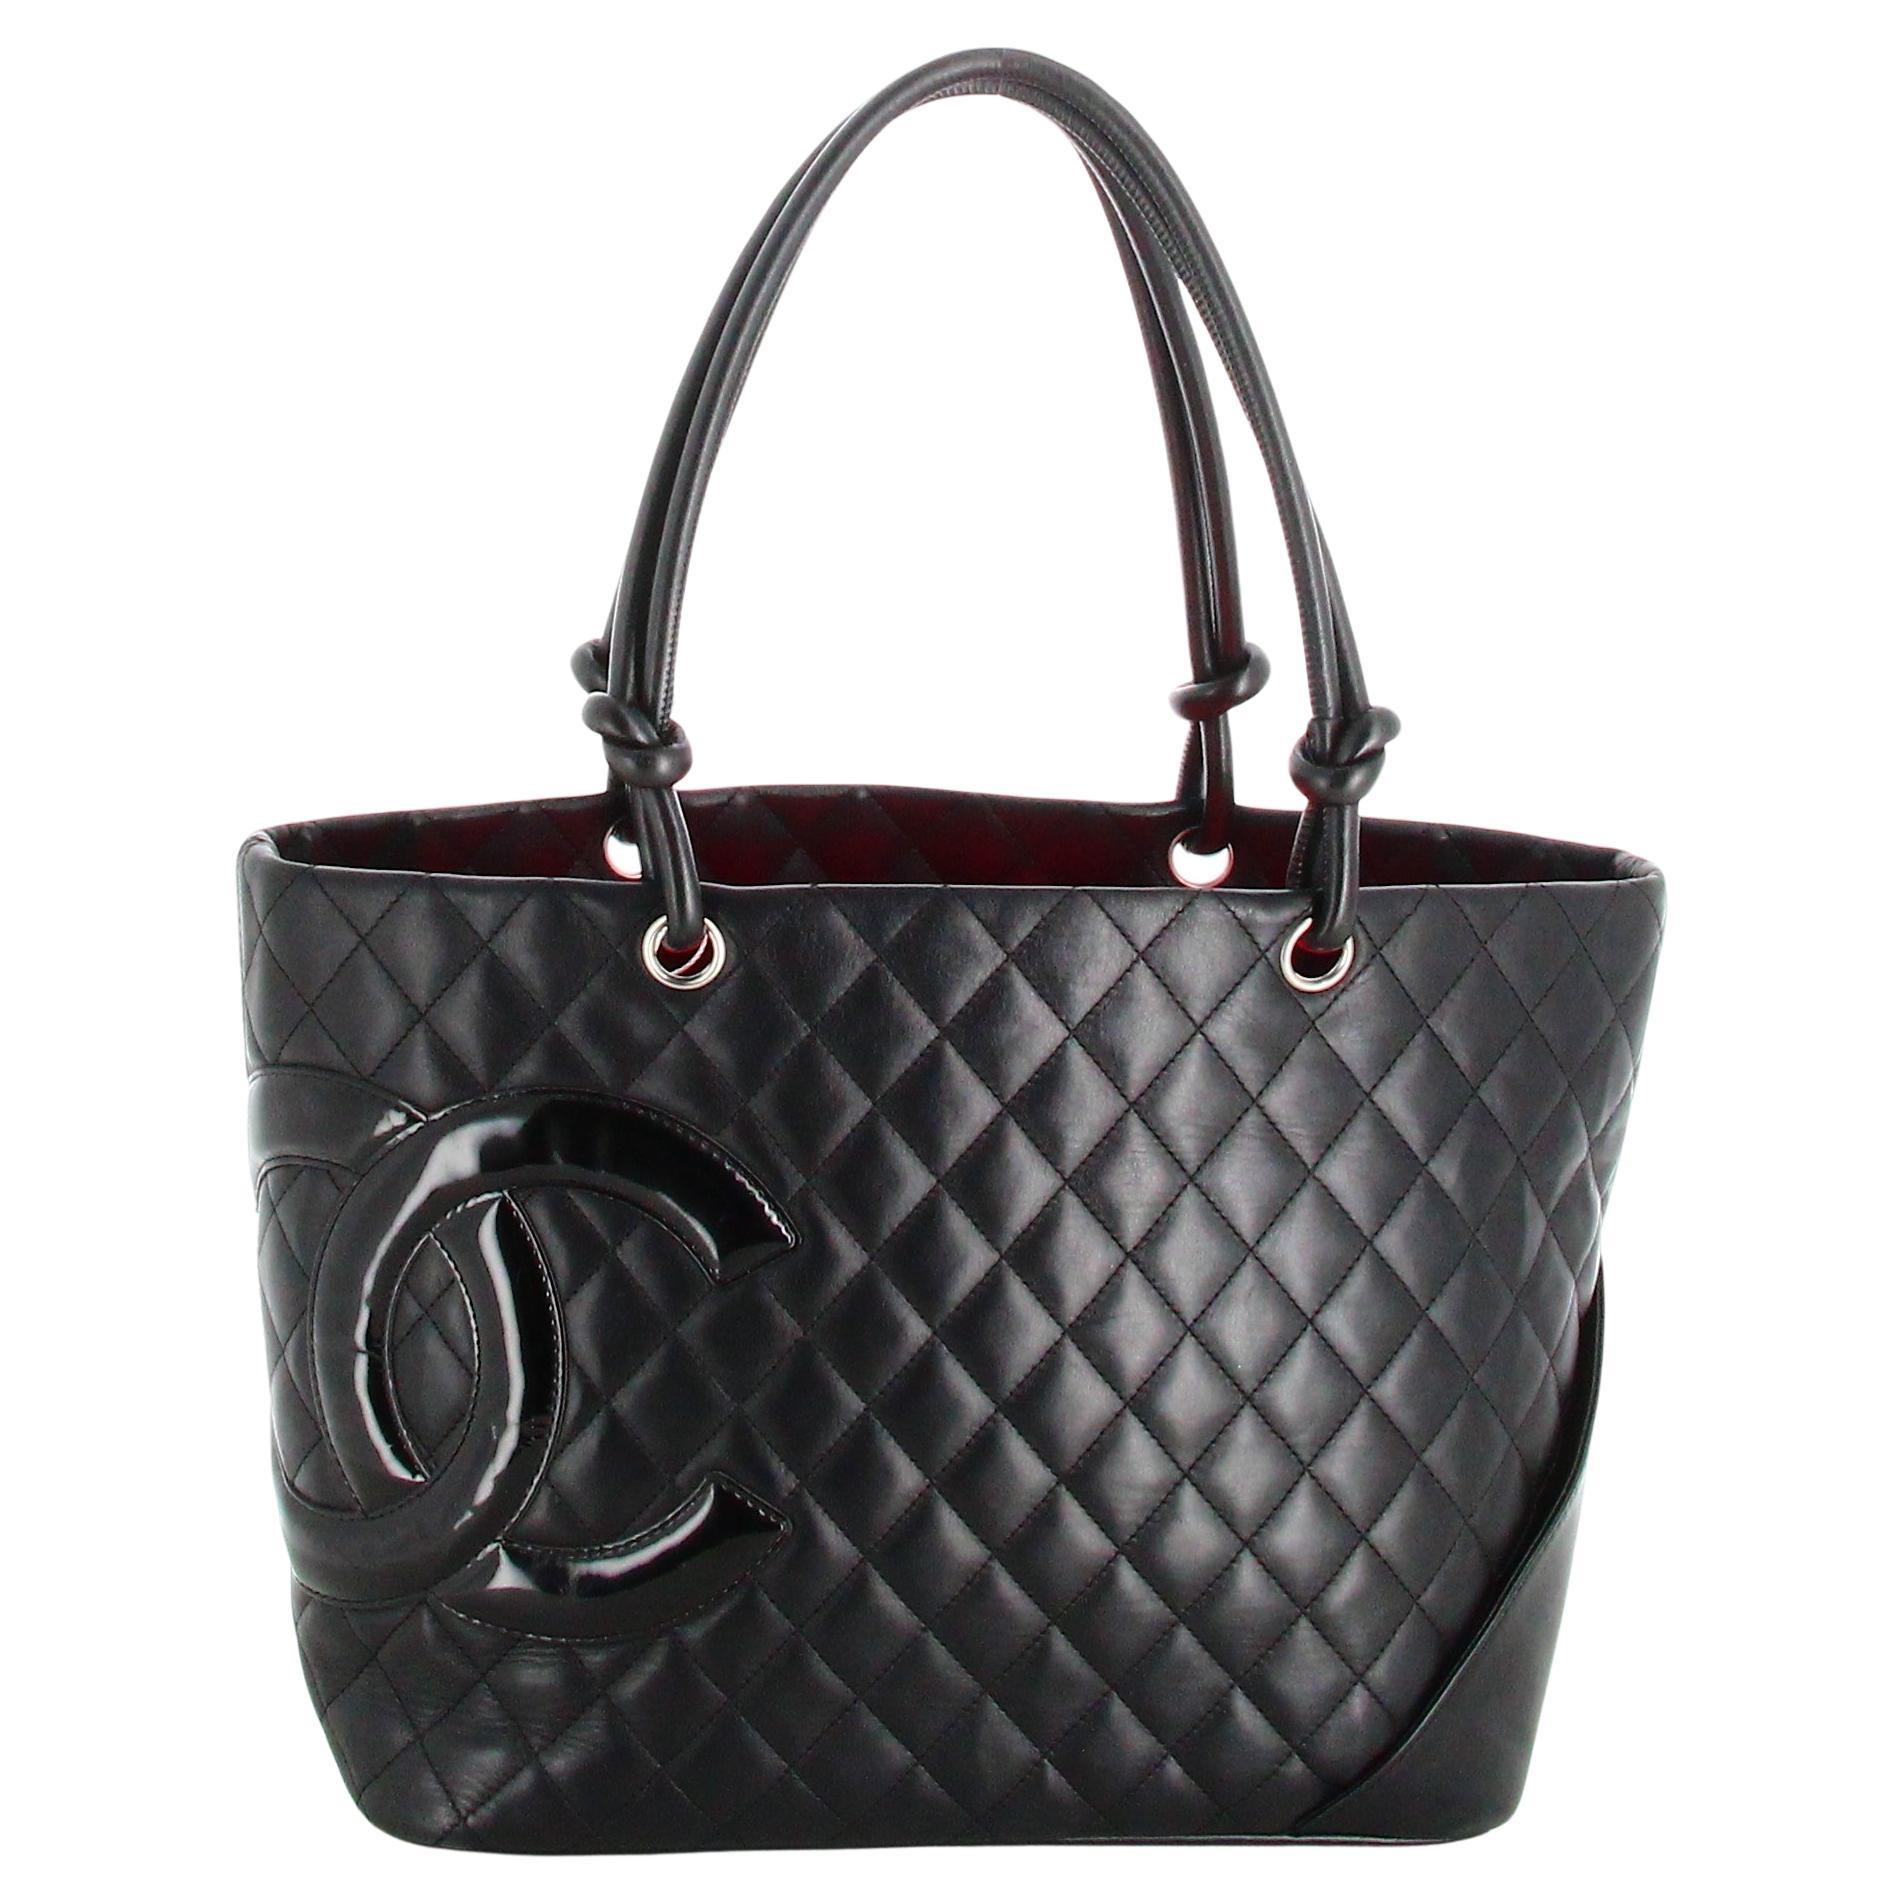 Chanel Handbag Black Leather Large Quilted Cambon Tote Line For Sale